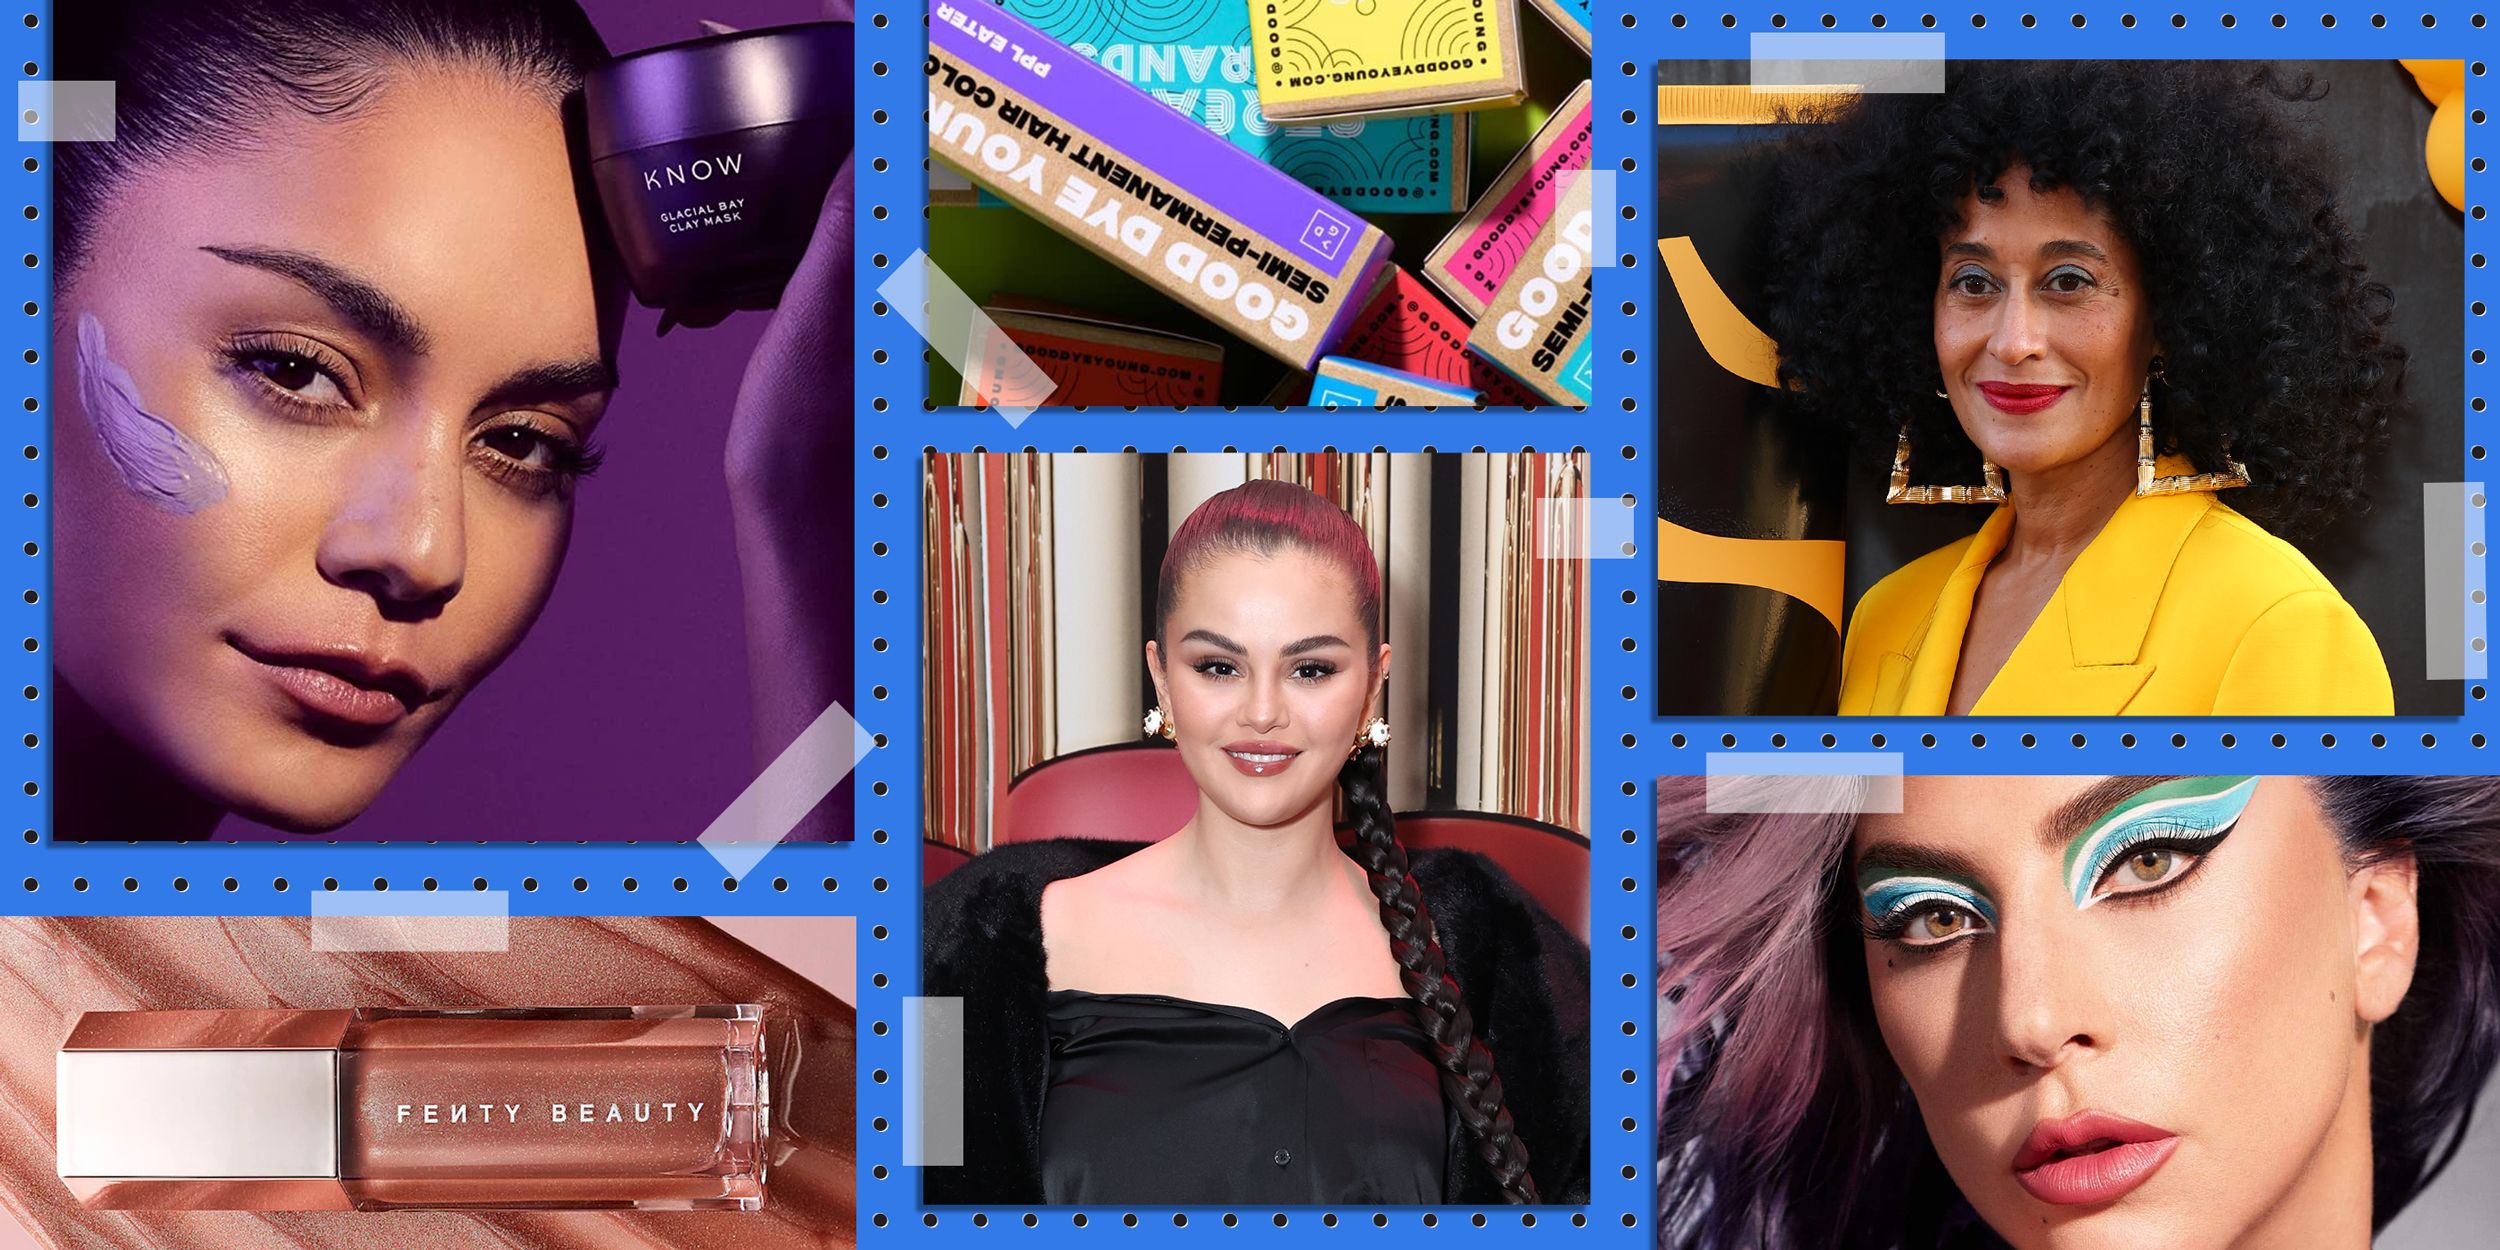 The 9 Best Celebrity Beauty Brands on the Market Right Now